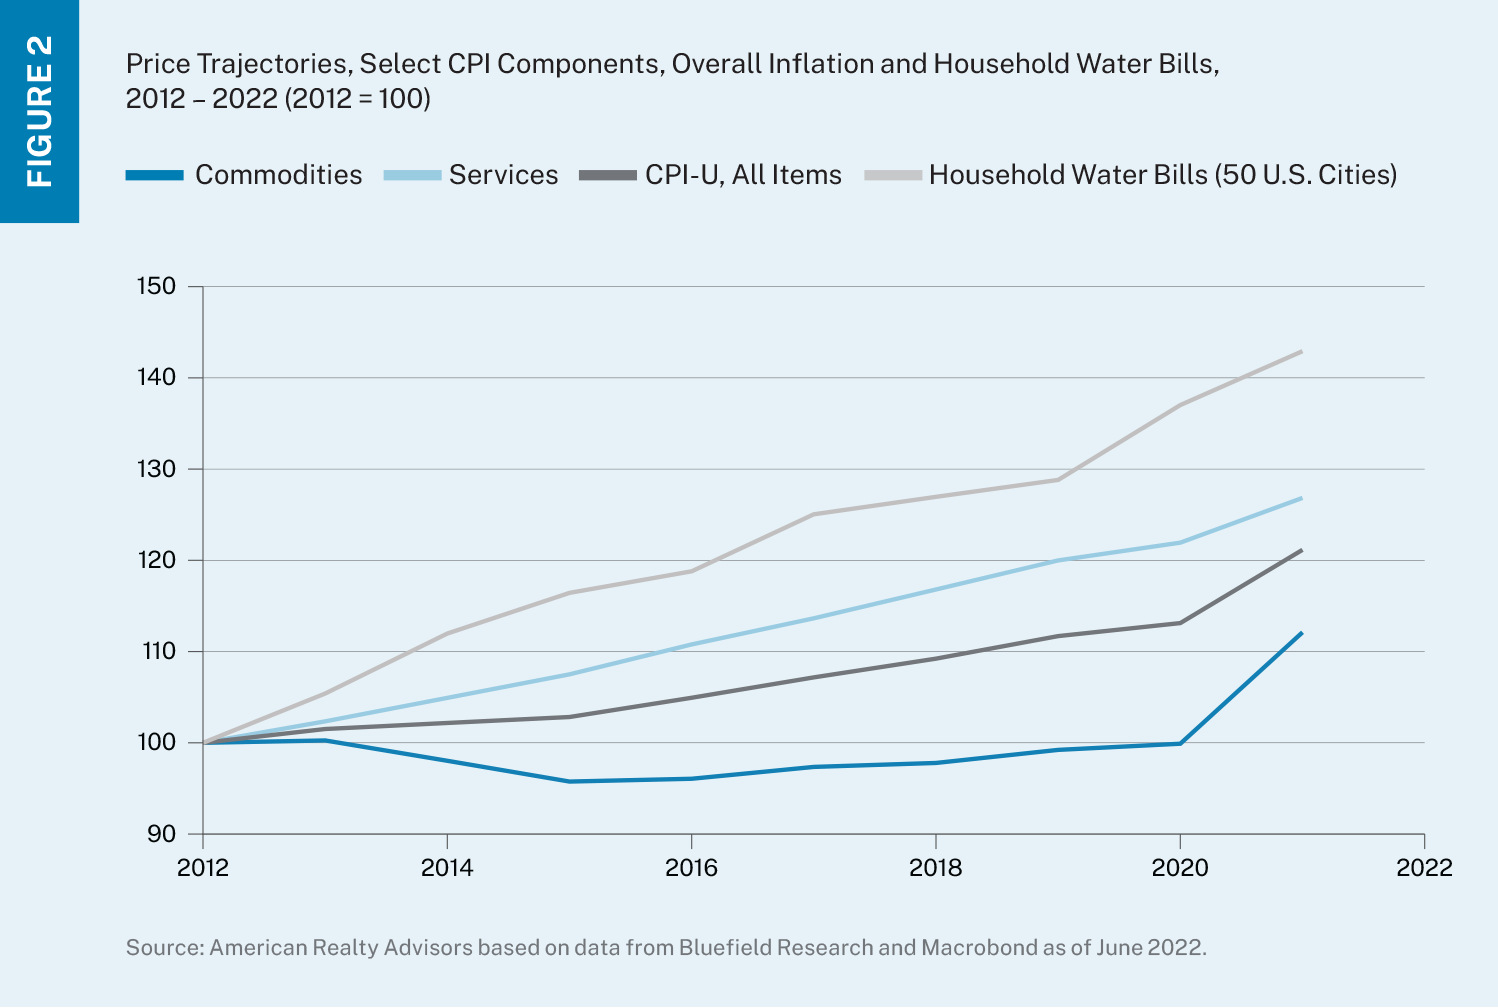 Graph displaying the price trajectories of select CPI components, overall inflation, and household water bills from 2012-2022